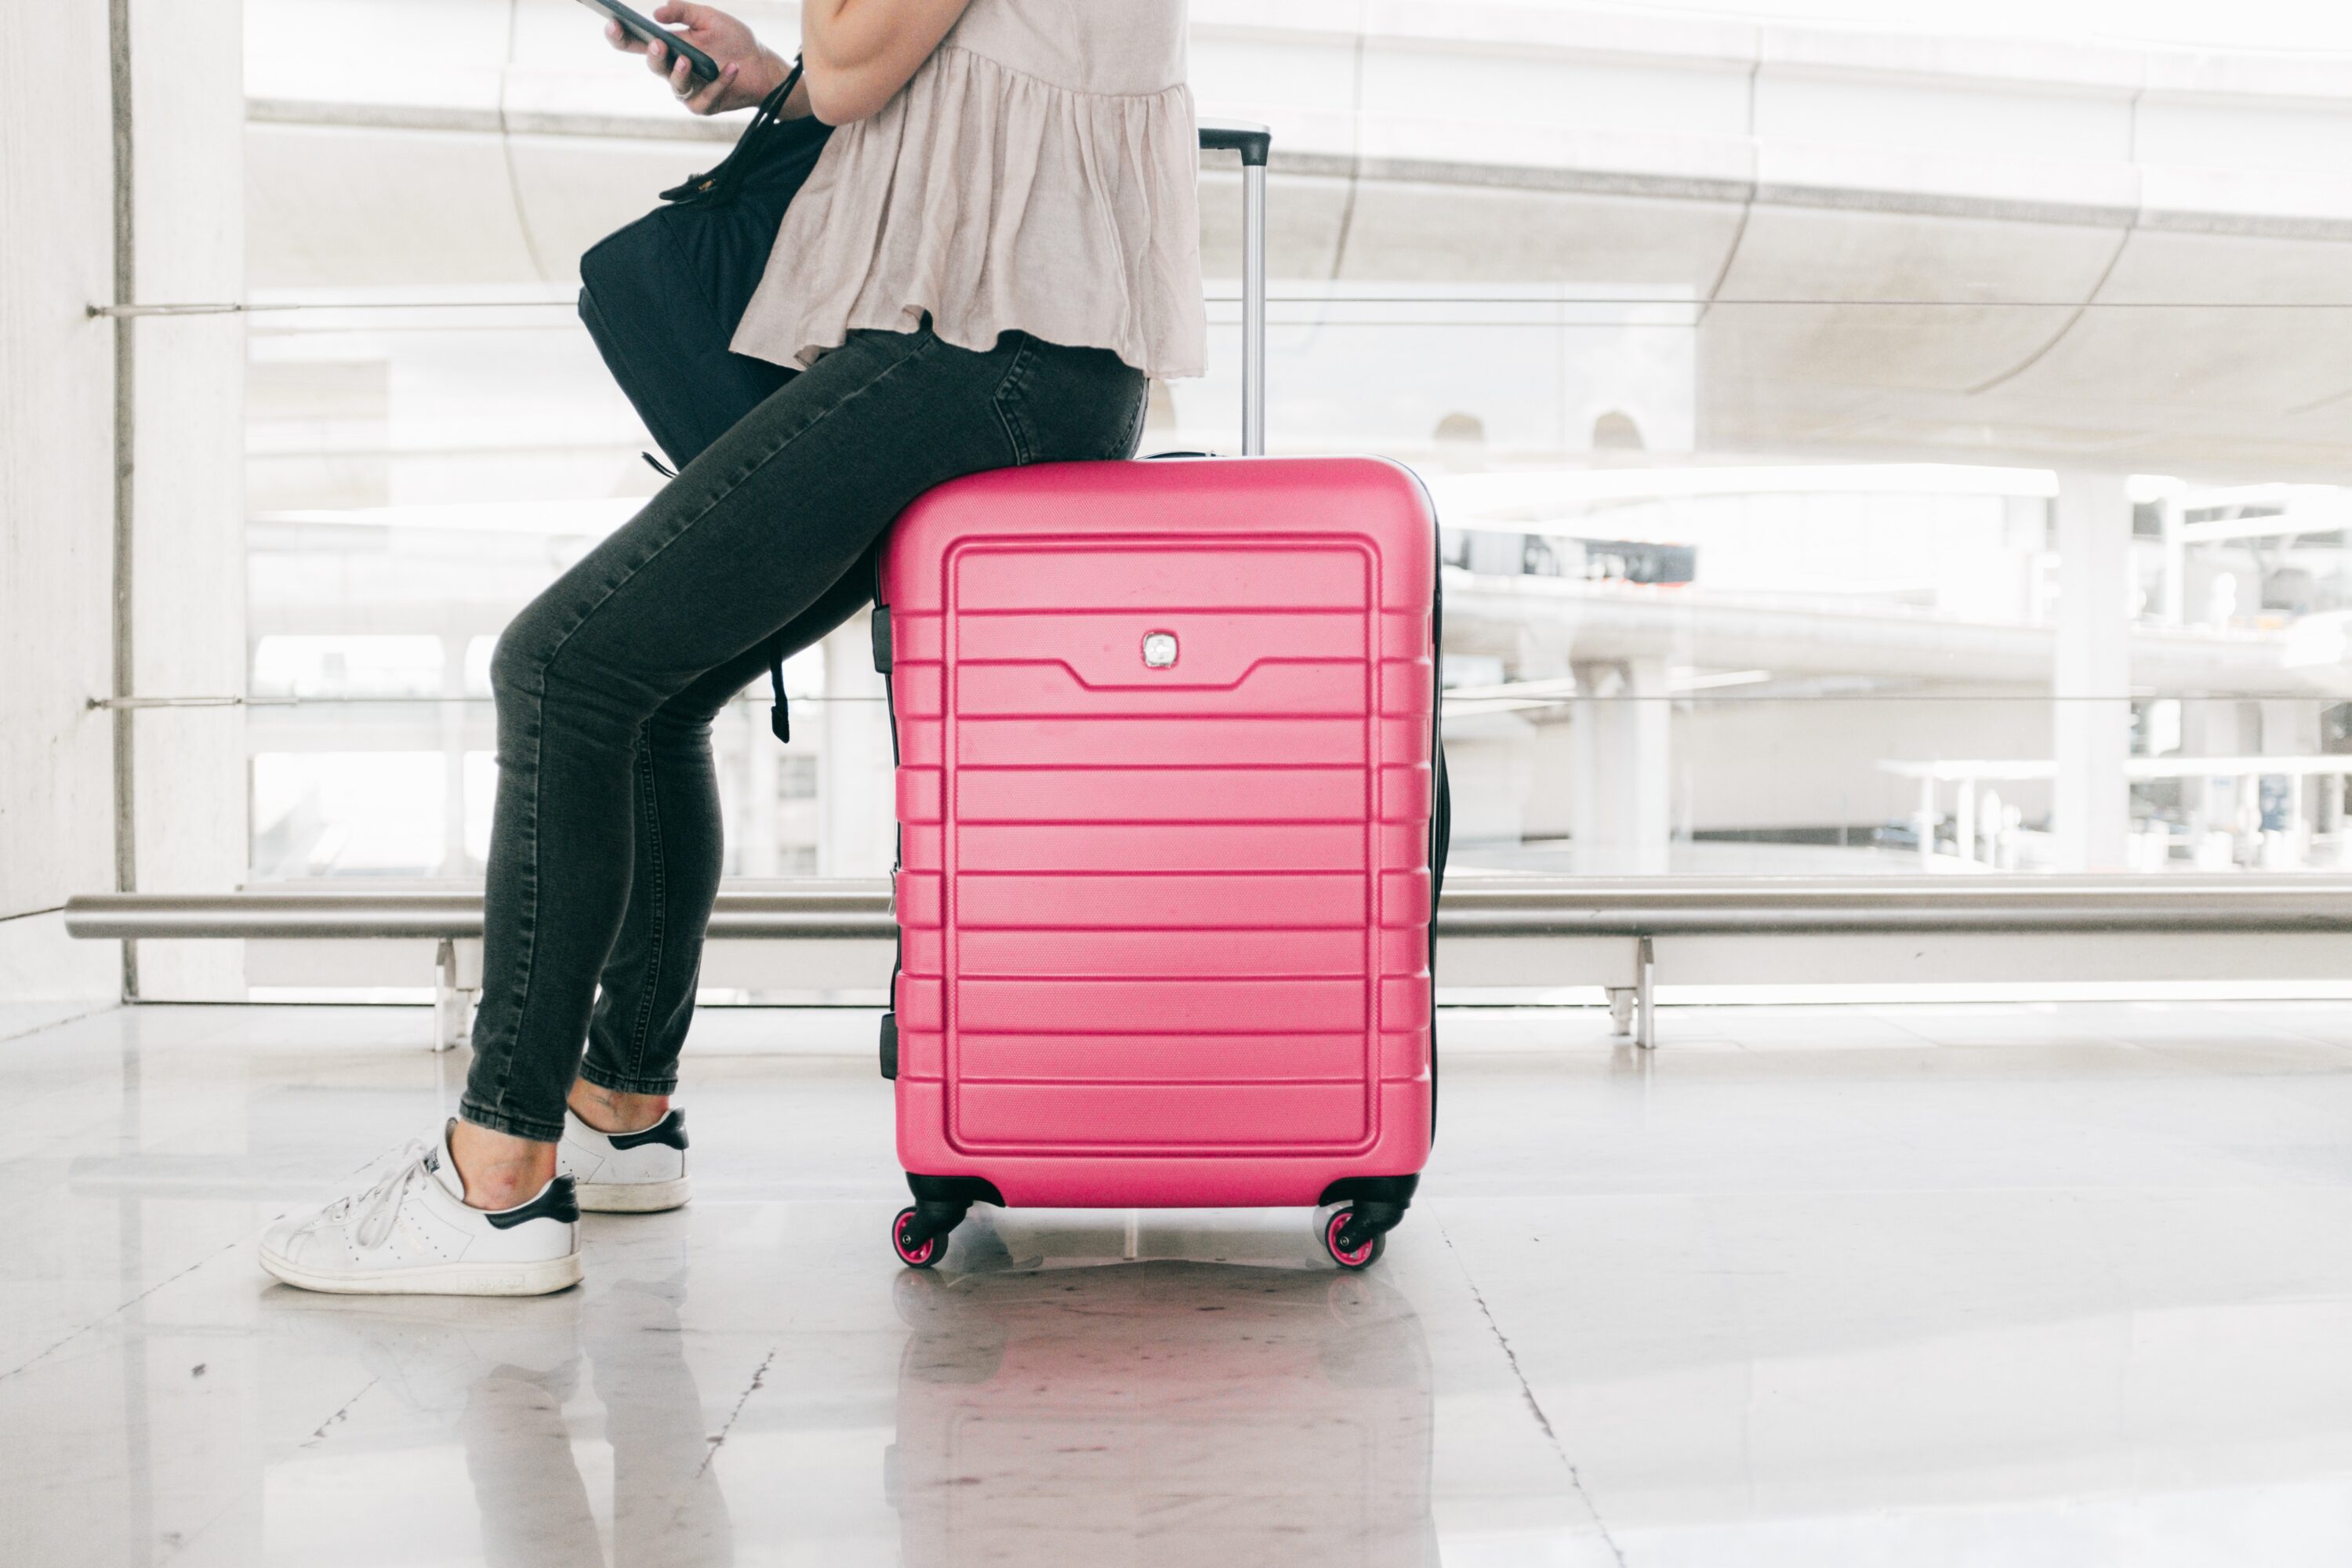 https://betches.s3.amazonaws.com/app/uploads/2020/02/06190723/woman-in-white-top-and-denim-jeans-sitting-on-red-luggage-3597111-3000x2000.jpg